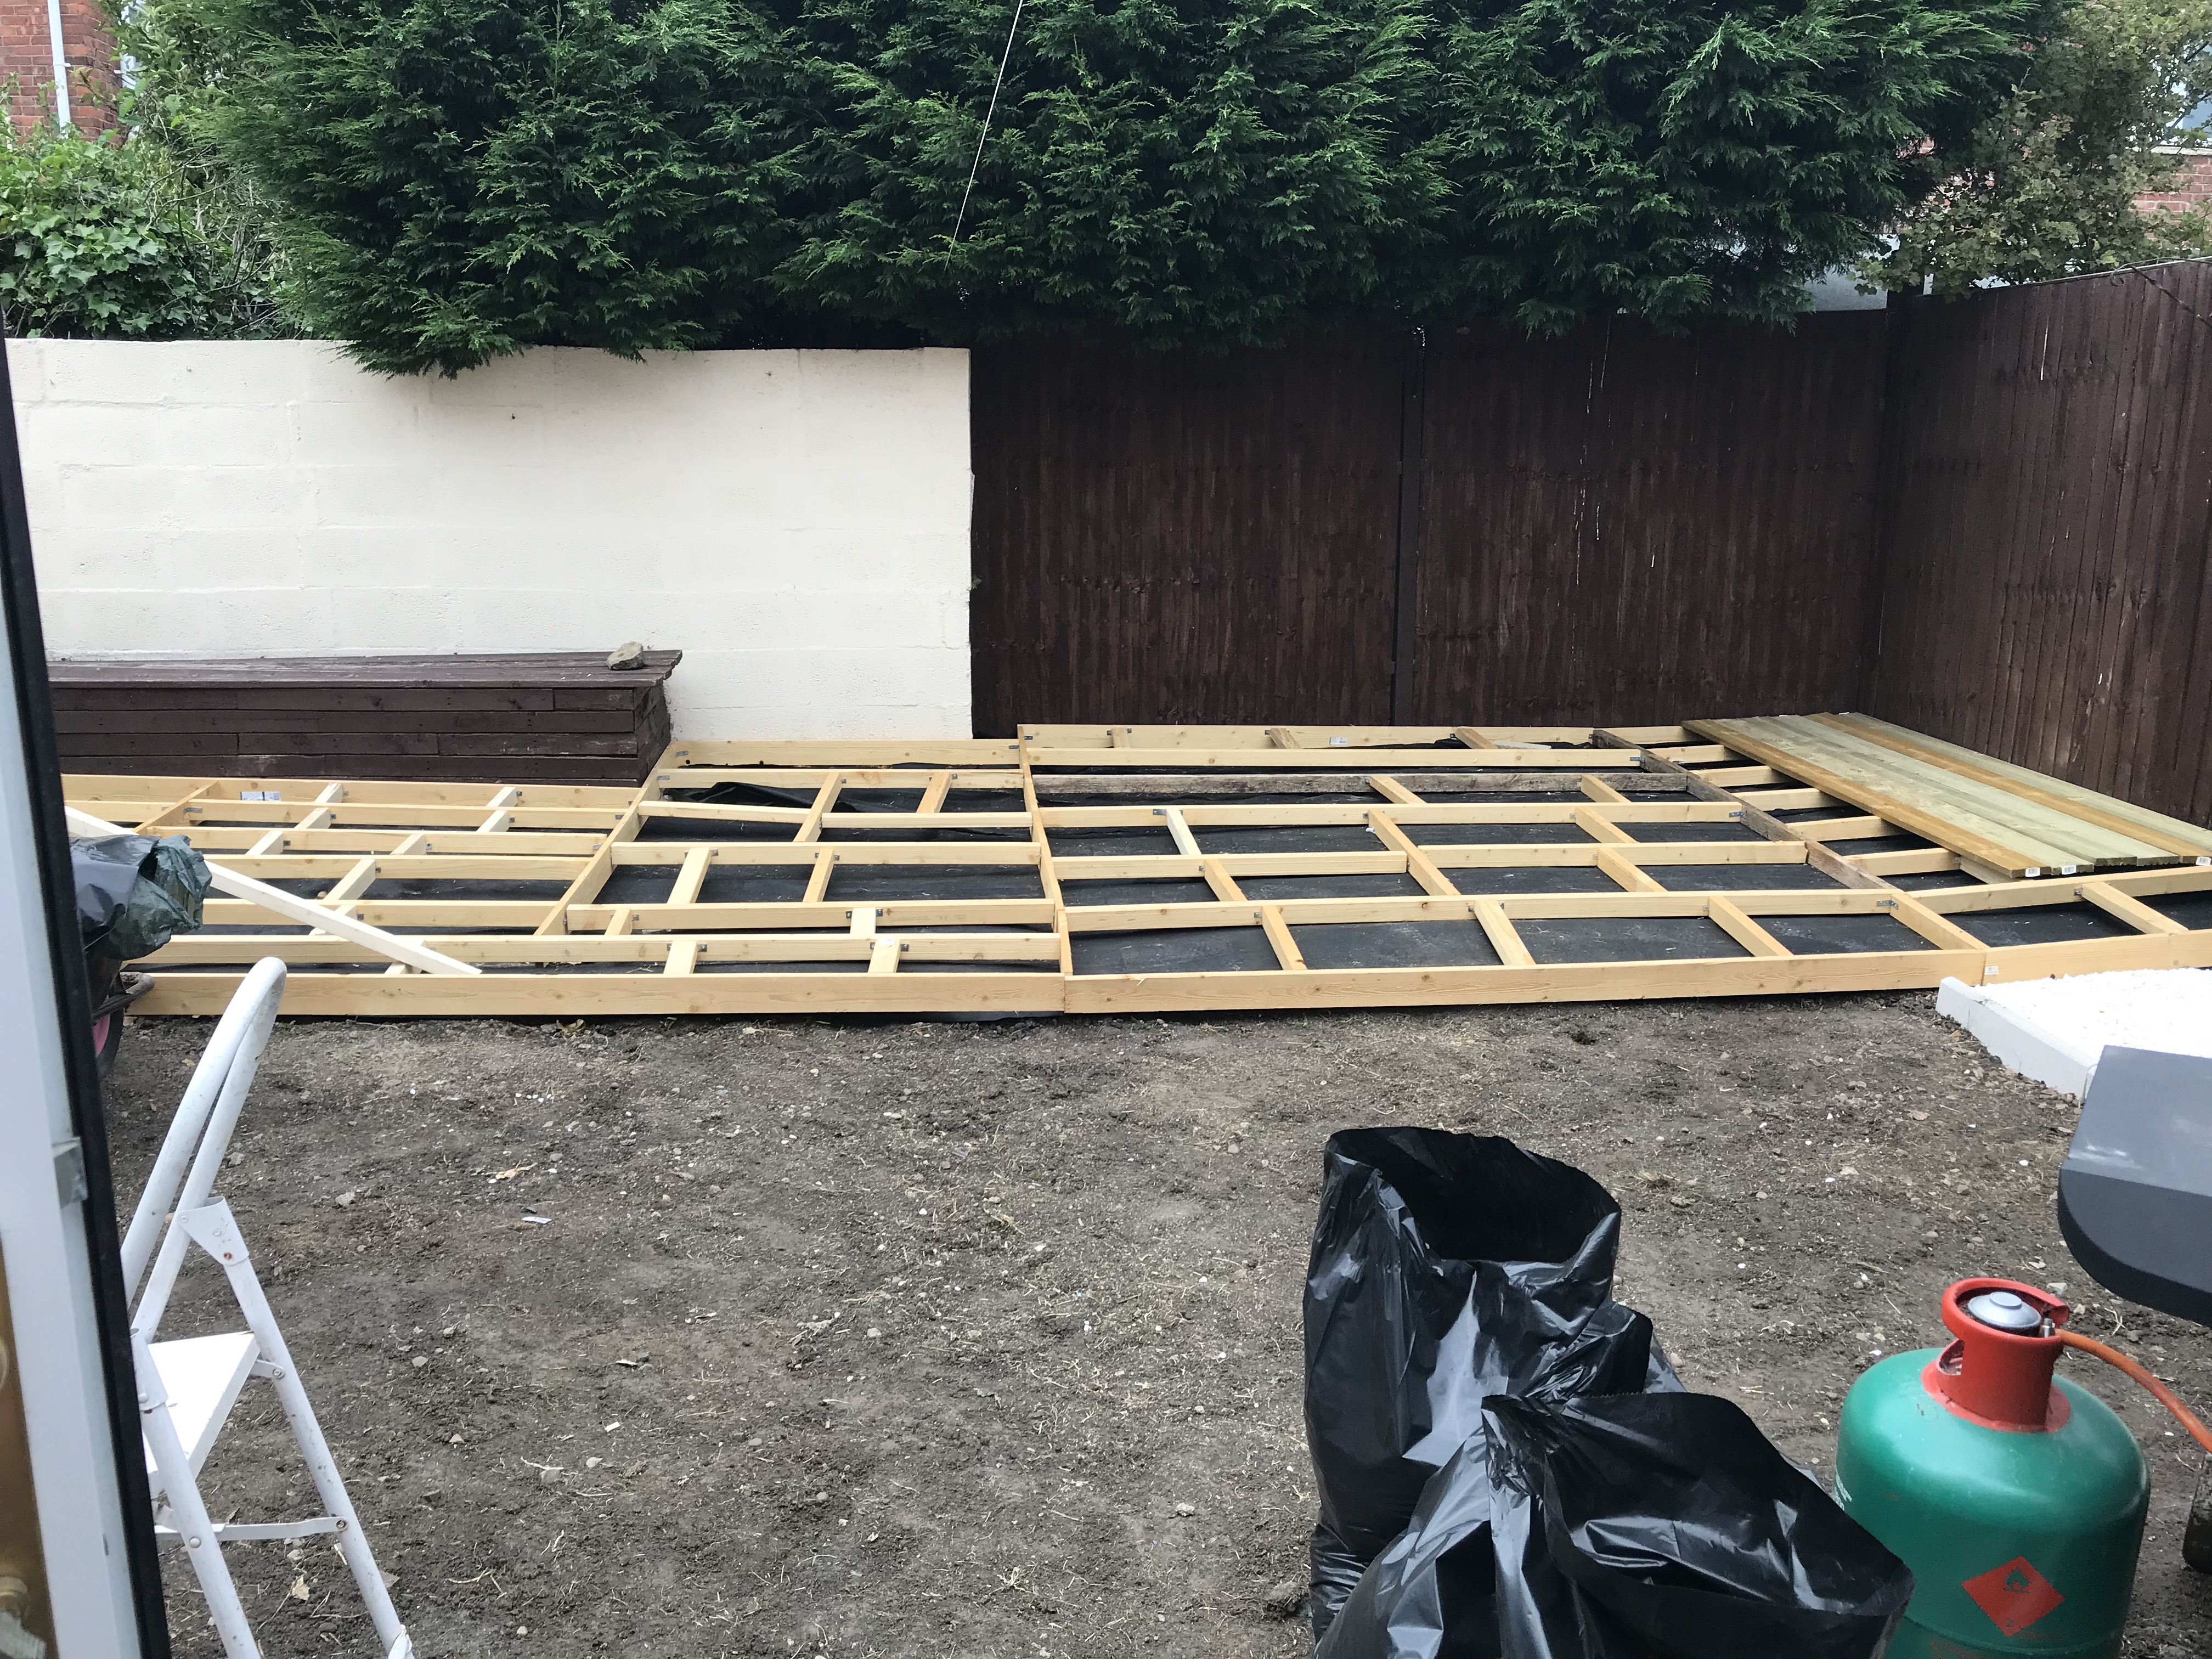 Building Decking | Garden renovation and transformation - styled on Love Island and Ocean Beach Ibiza | DIY Projects and Upcycling | Small garden inspo | Elle Blonde Luxury Lifestyle Destination Blog